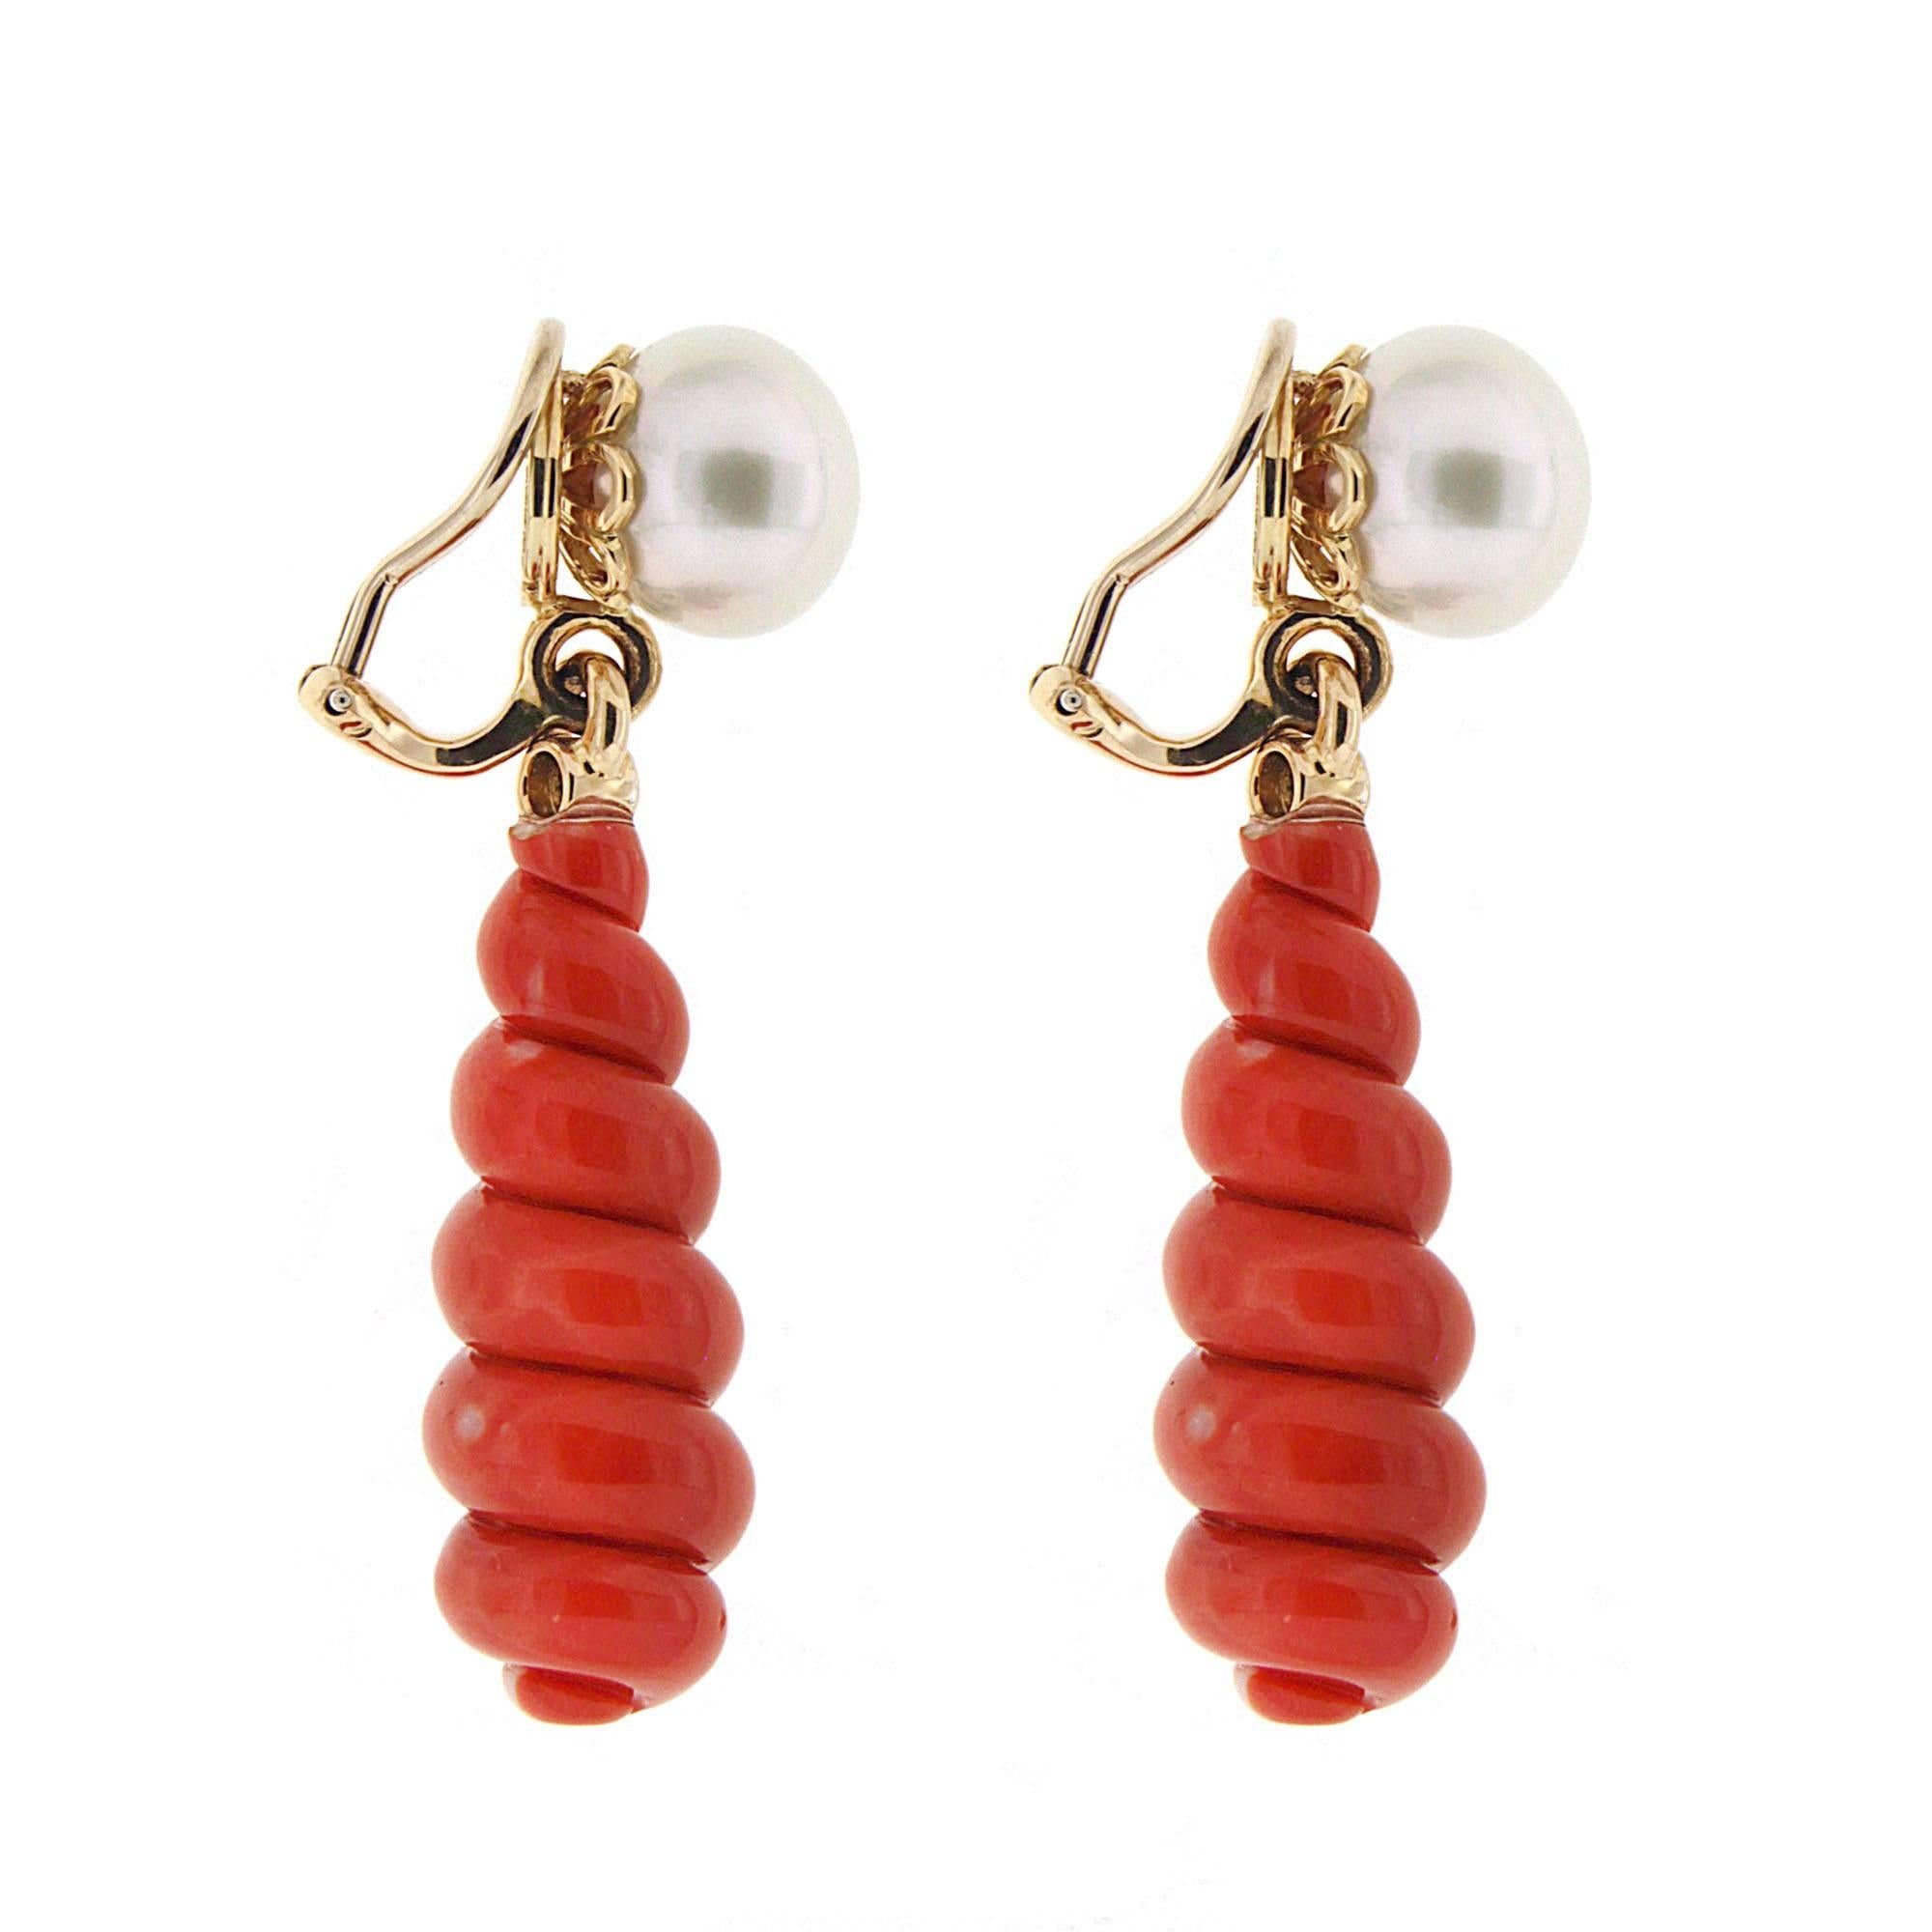 This unique pair of 12.3mm round freshwater pearl top with special cut spiral red coral drop earrings with accent bezel set round brilliant diamond connectors. The earrings are made in 18kt yellow gold with clip backs.

Diamond total weight is